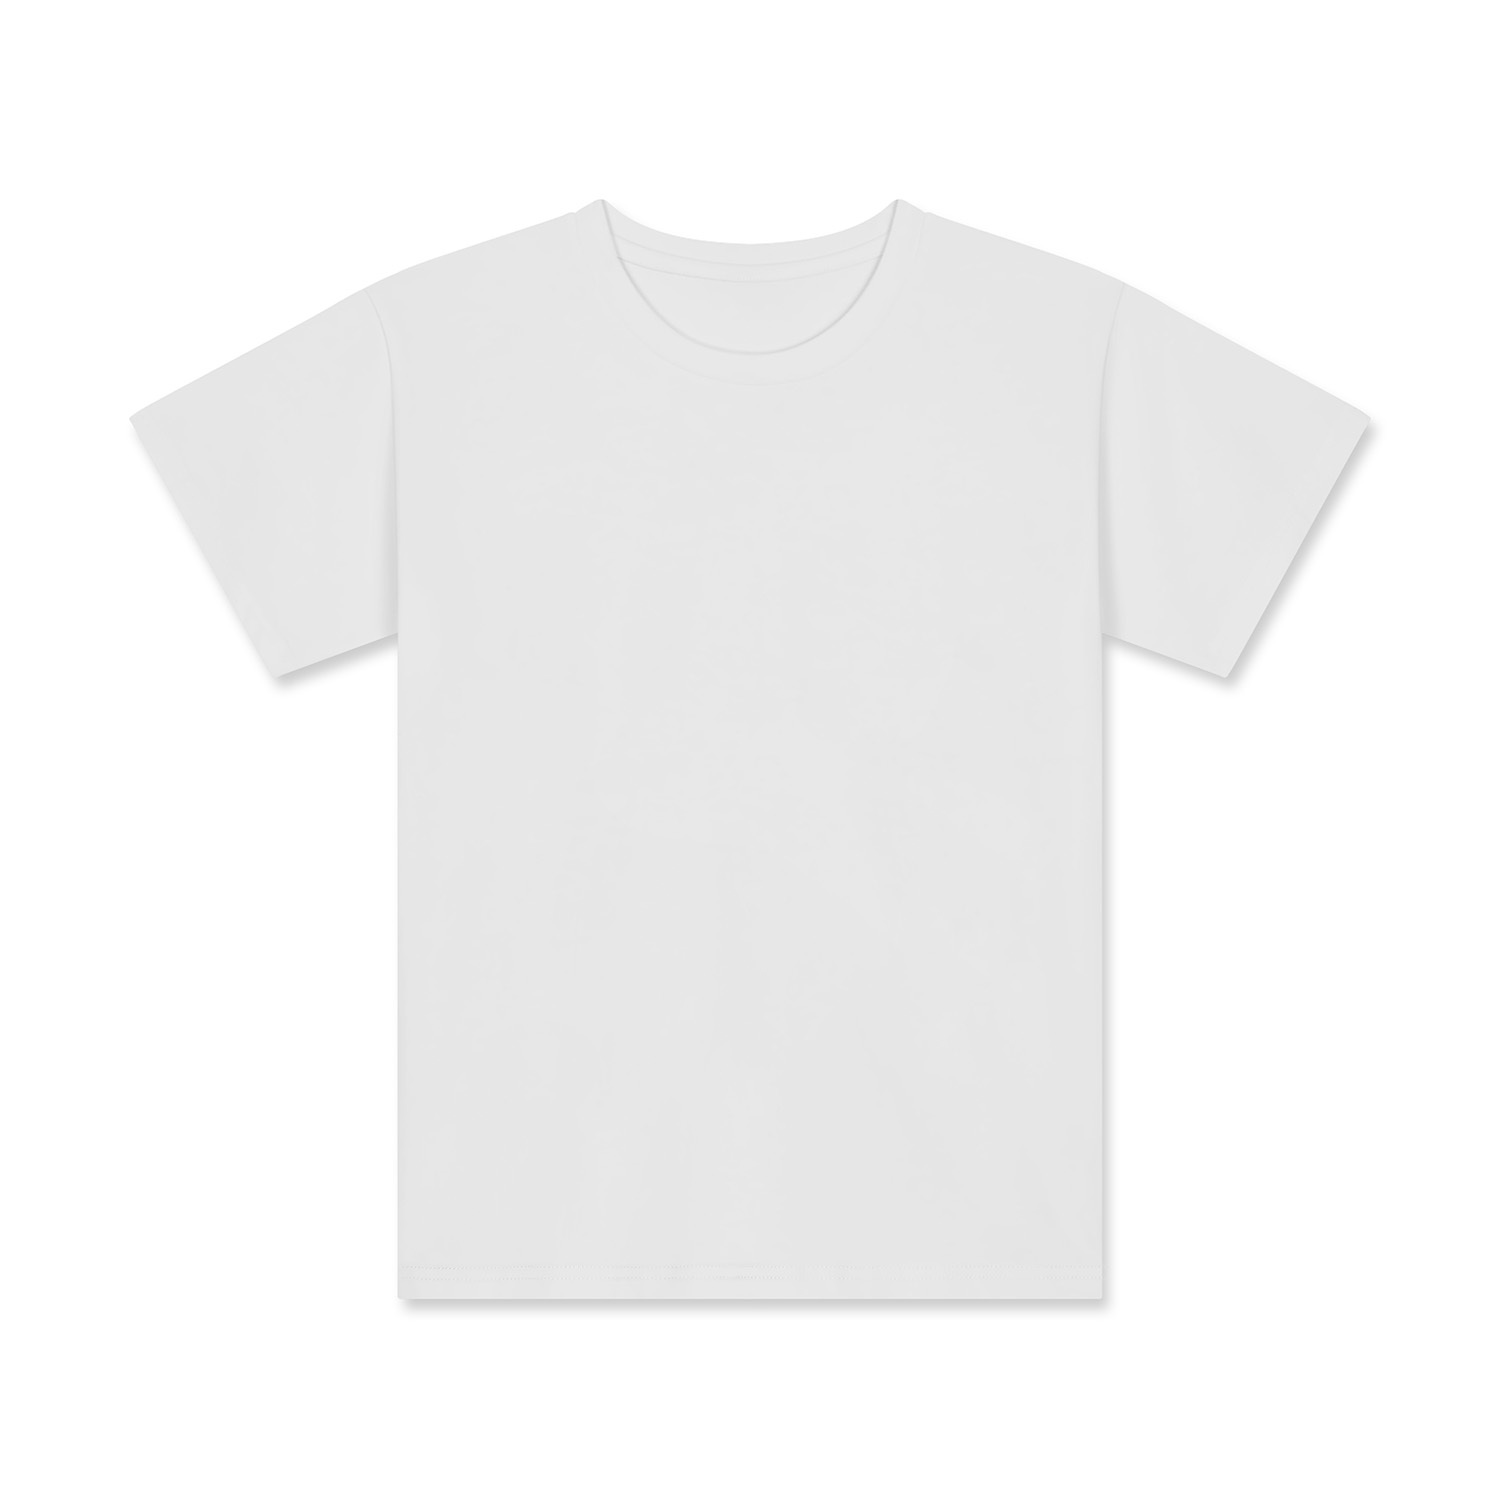 Shop Soft Cotton T-Shirts for Kids | High-Quality Cotton Tees